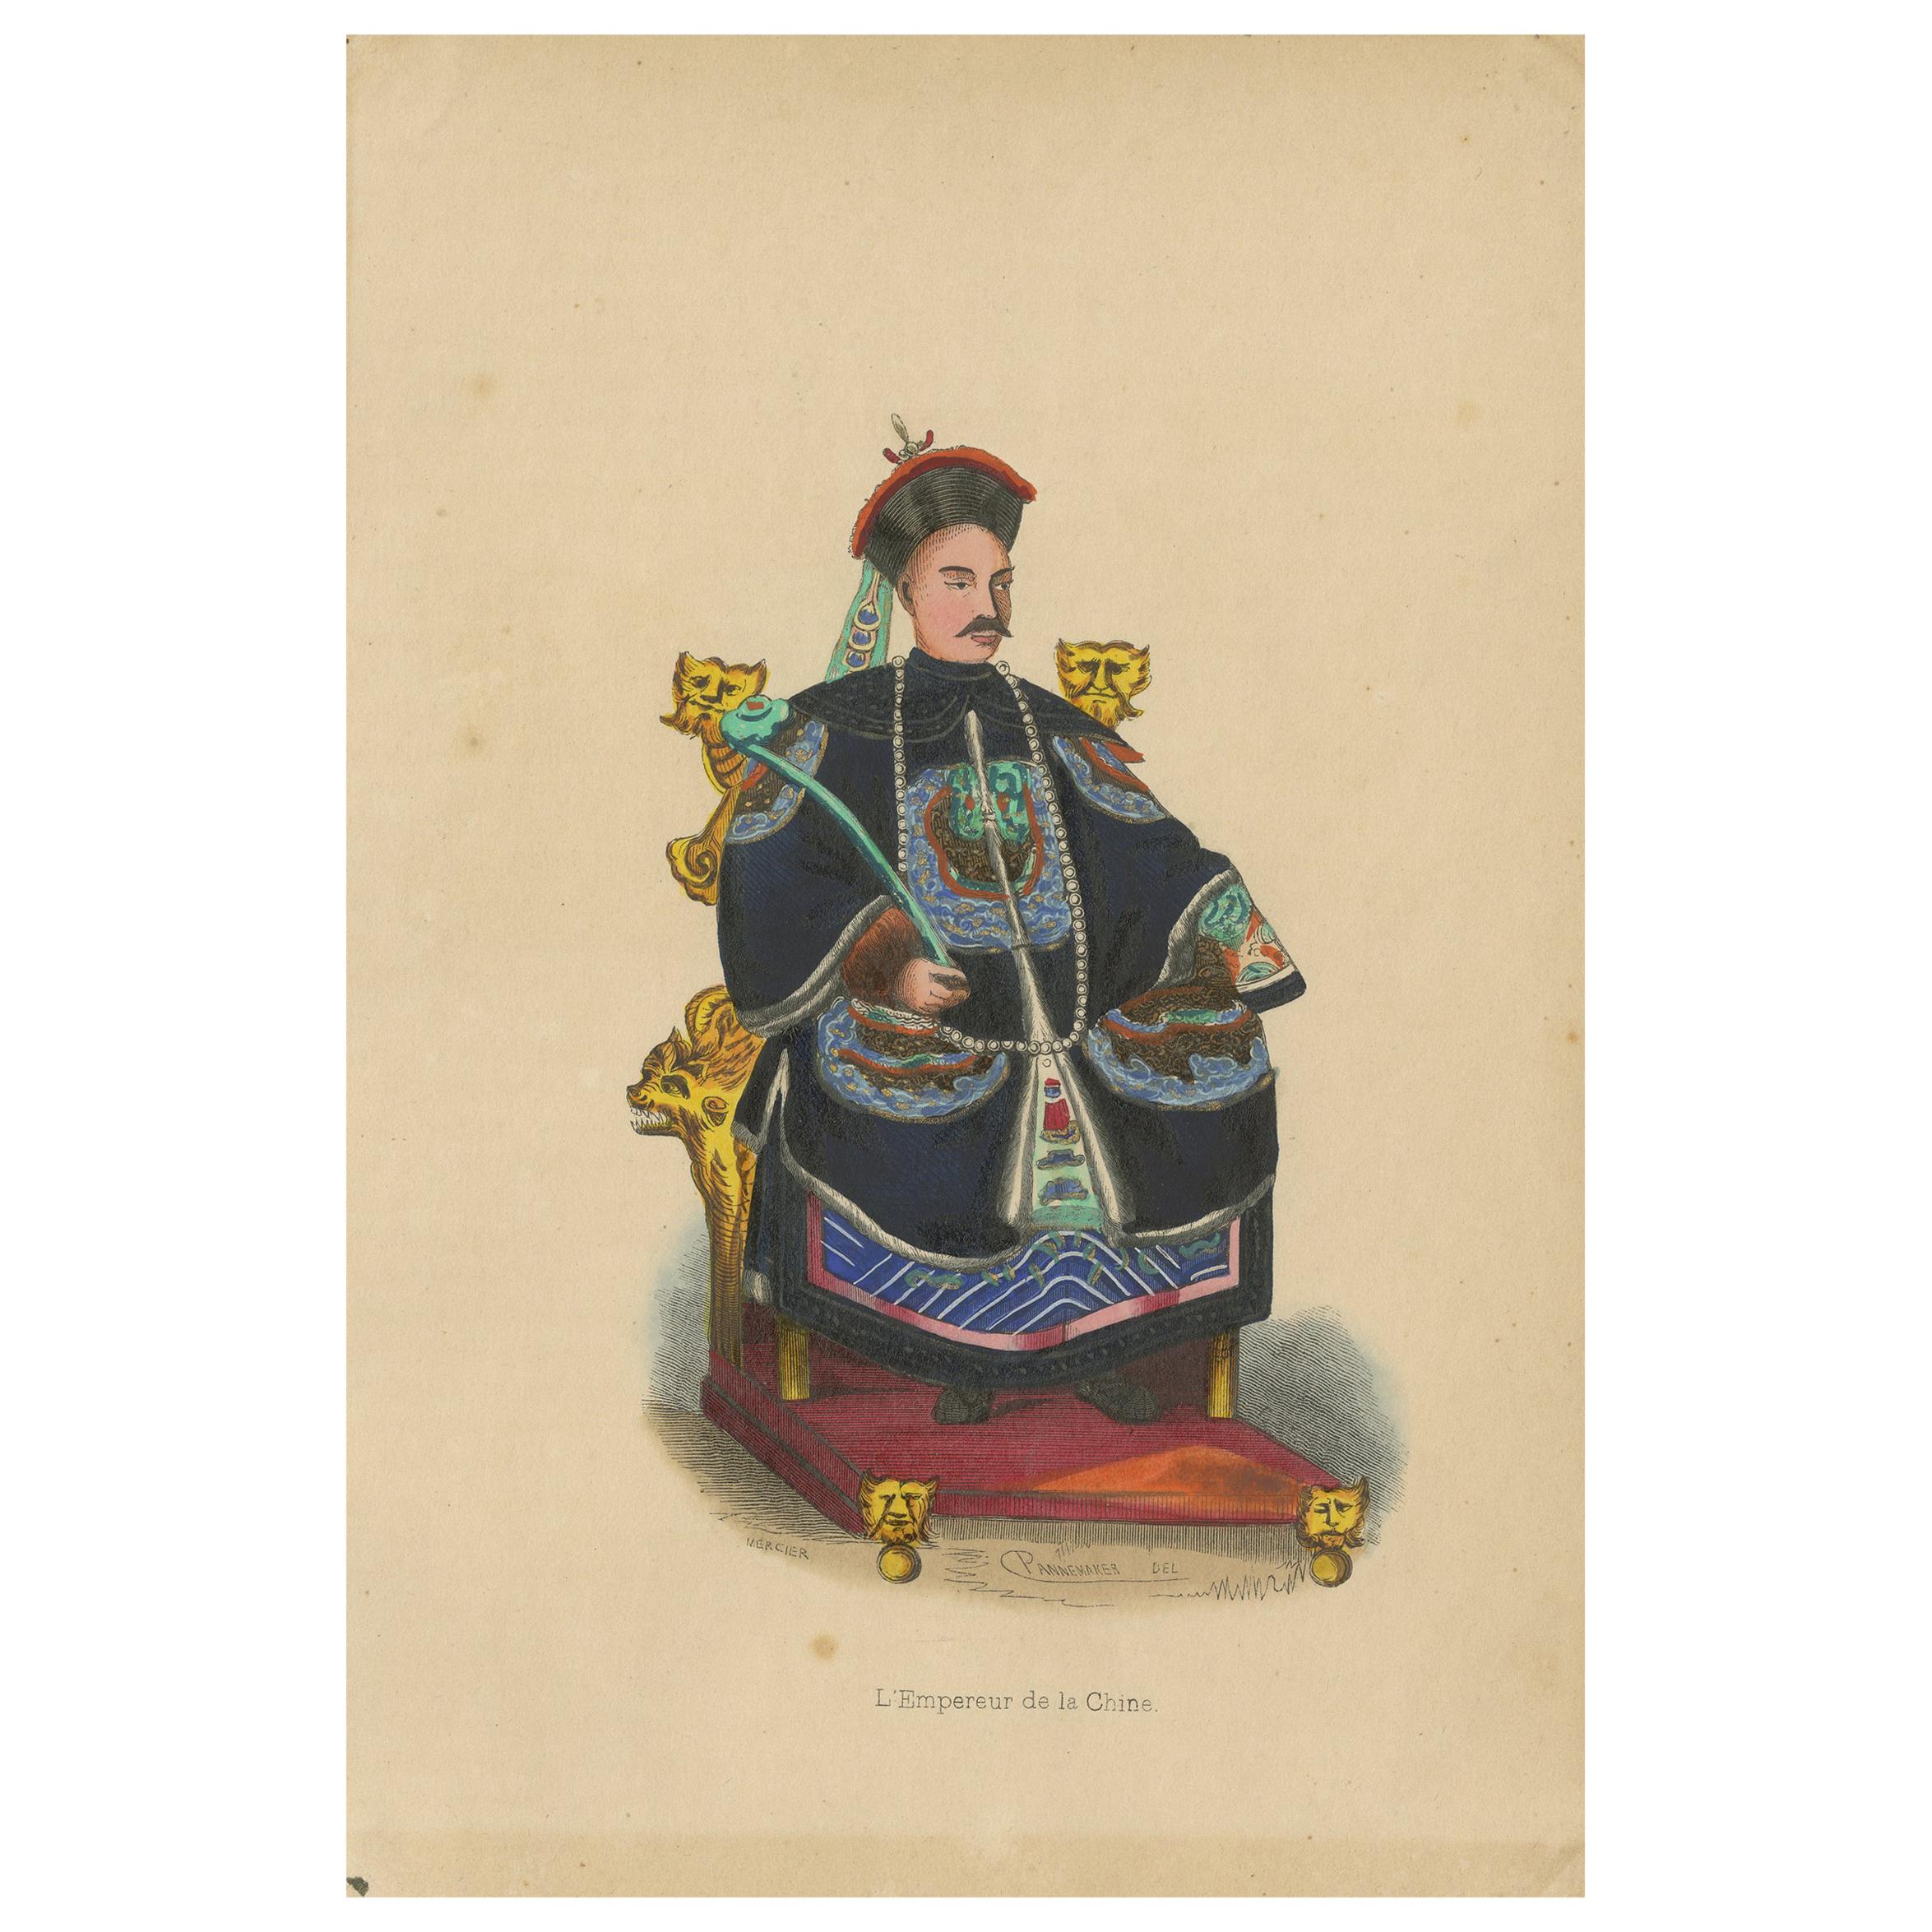 Antique Costume Print of a Chinese Emperor by Wahlen, 1843